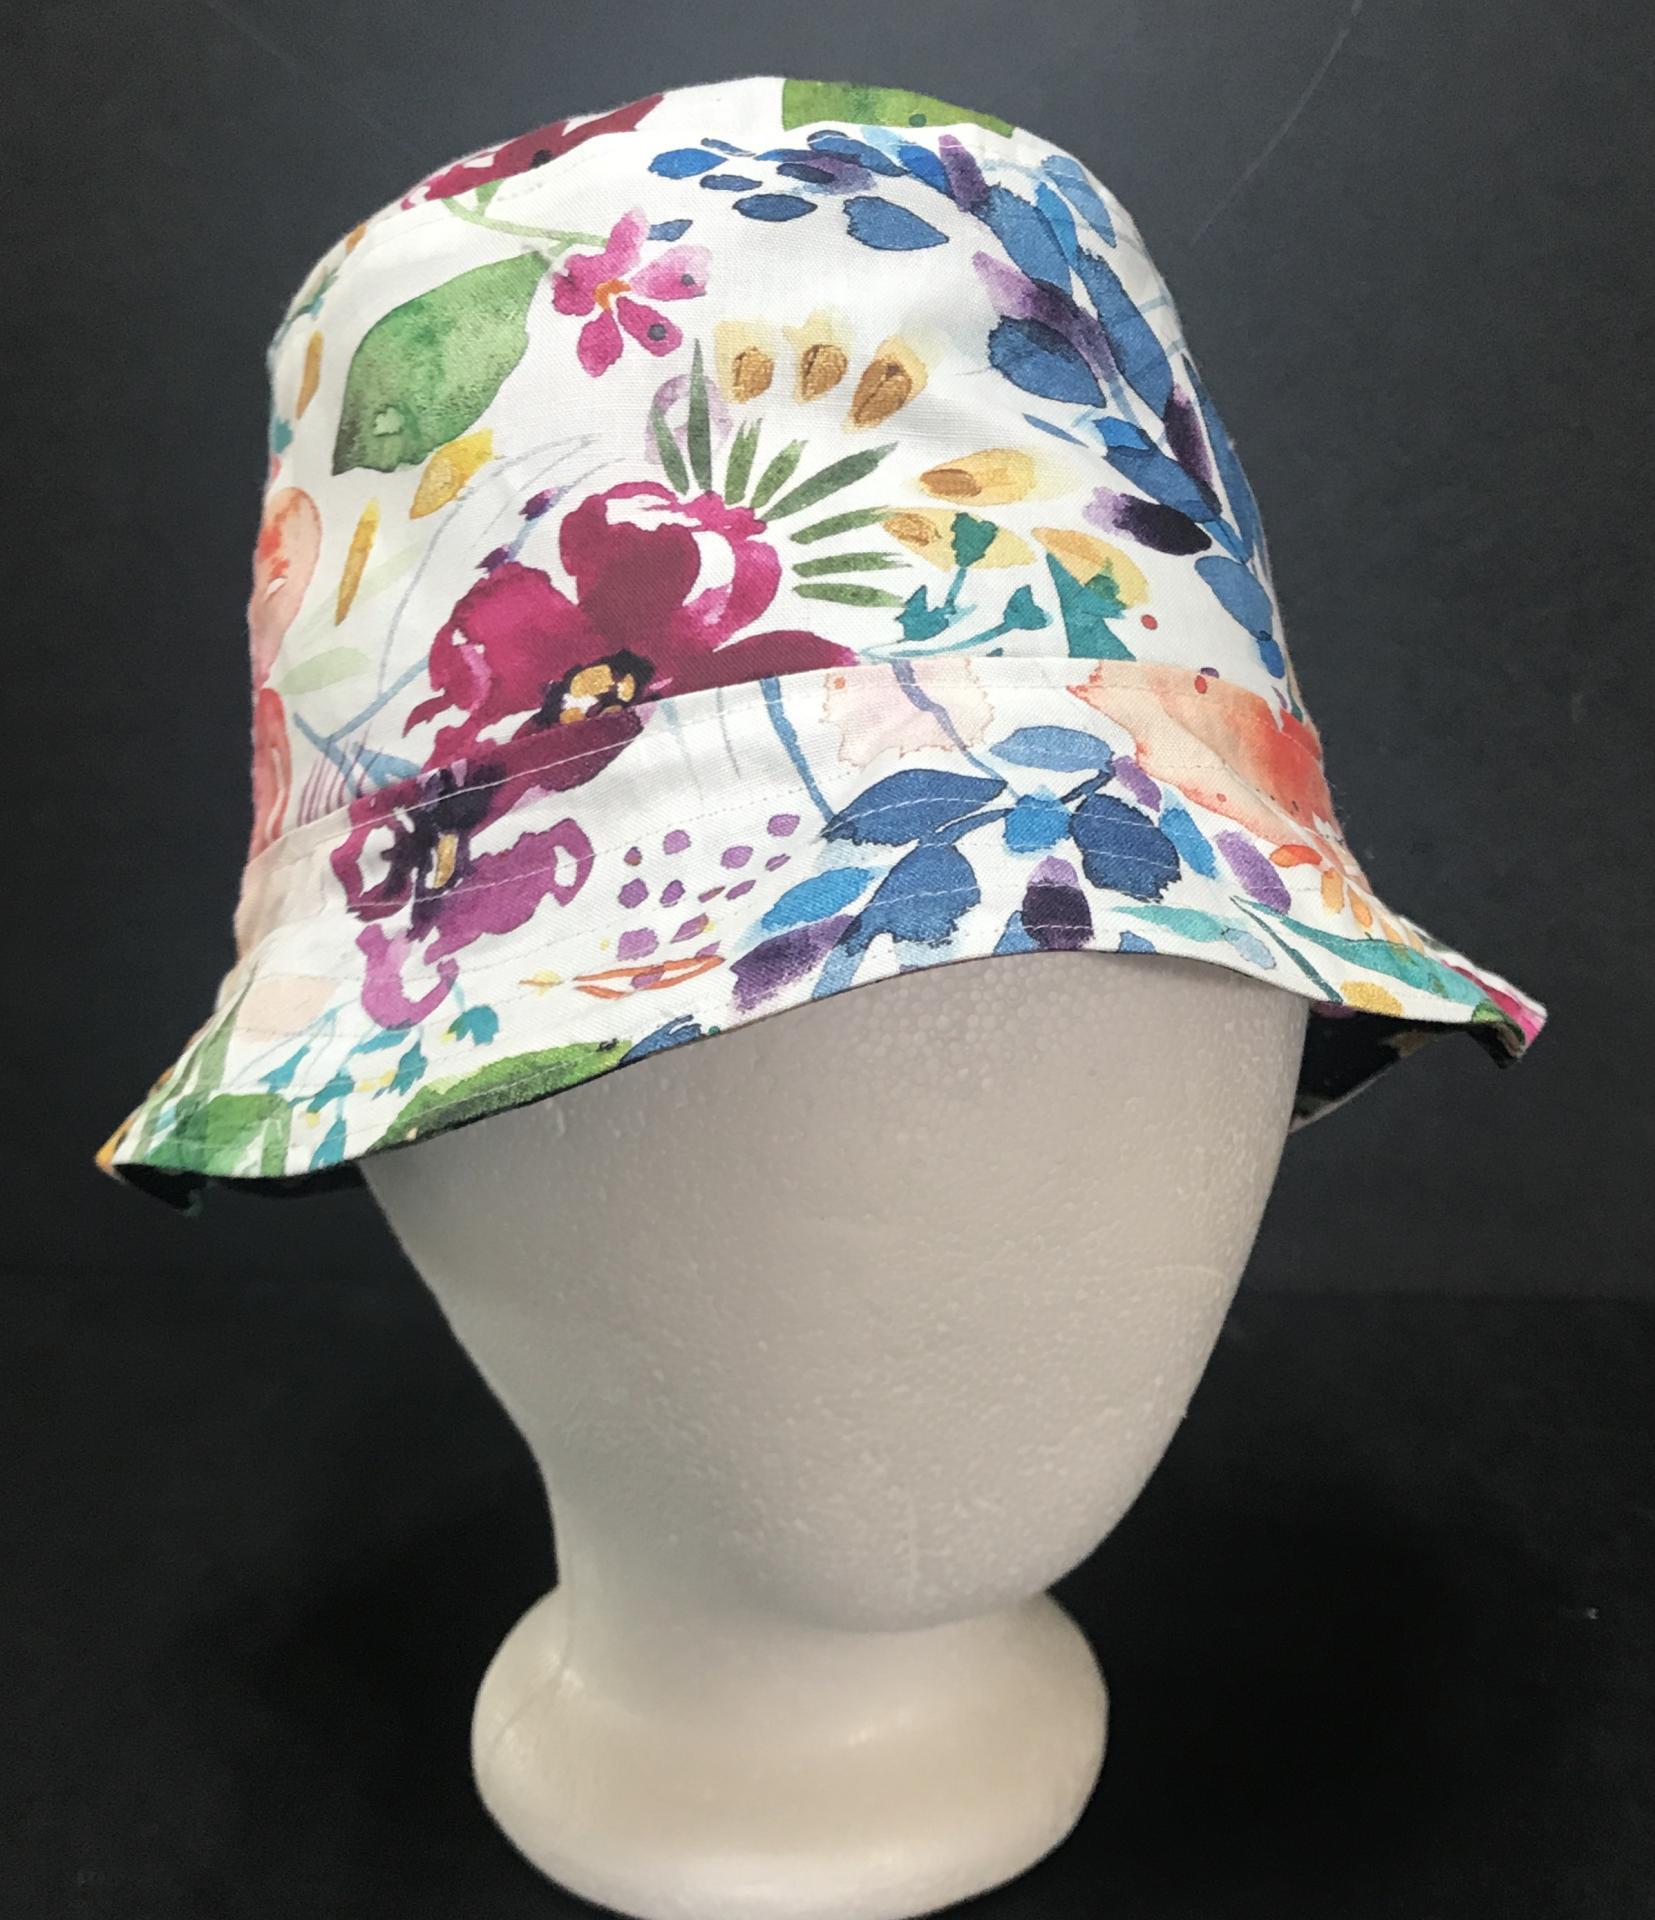 Watercolor floral print bucket hat, white backgound side facing out